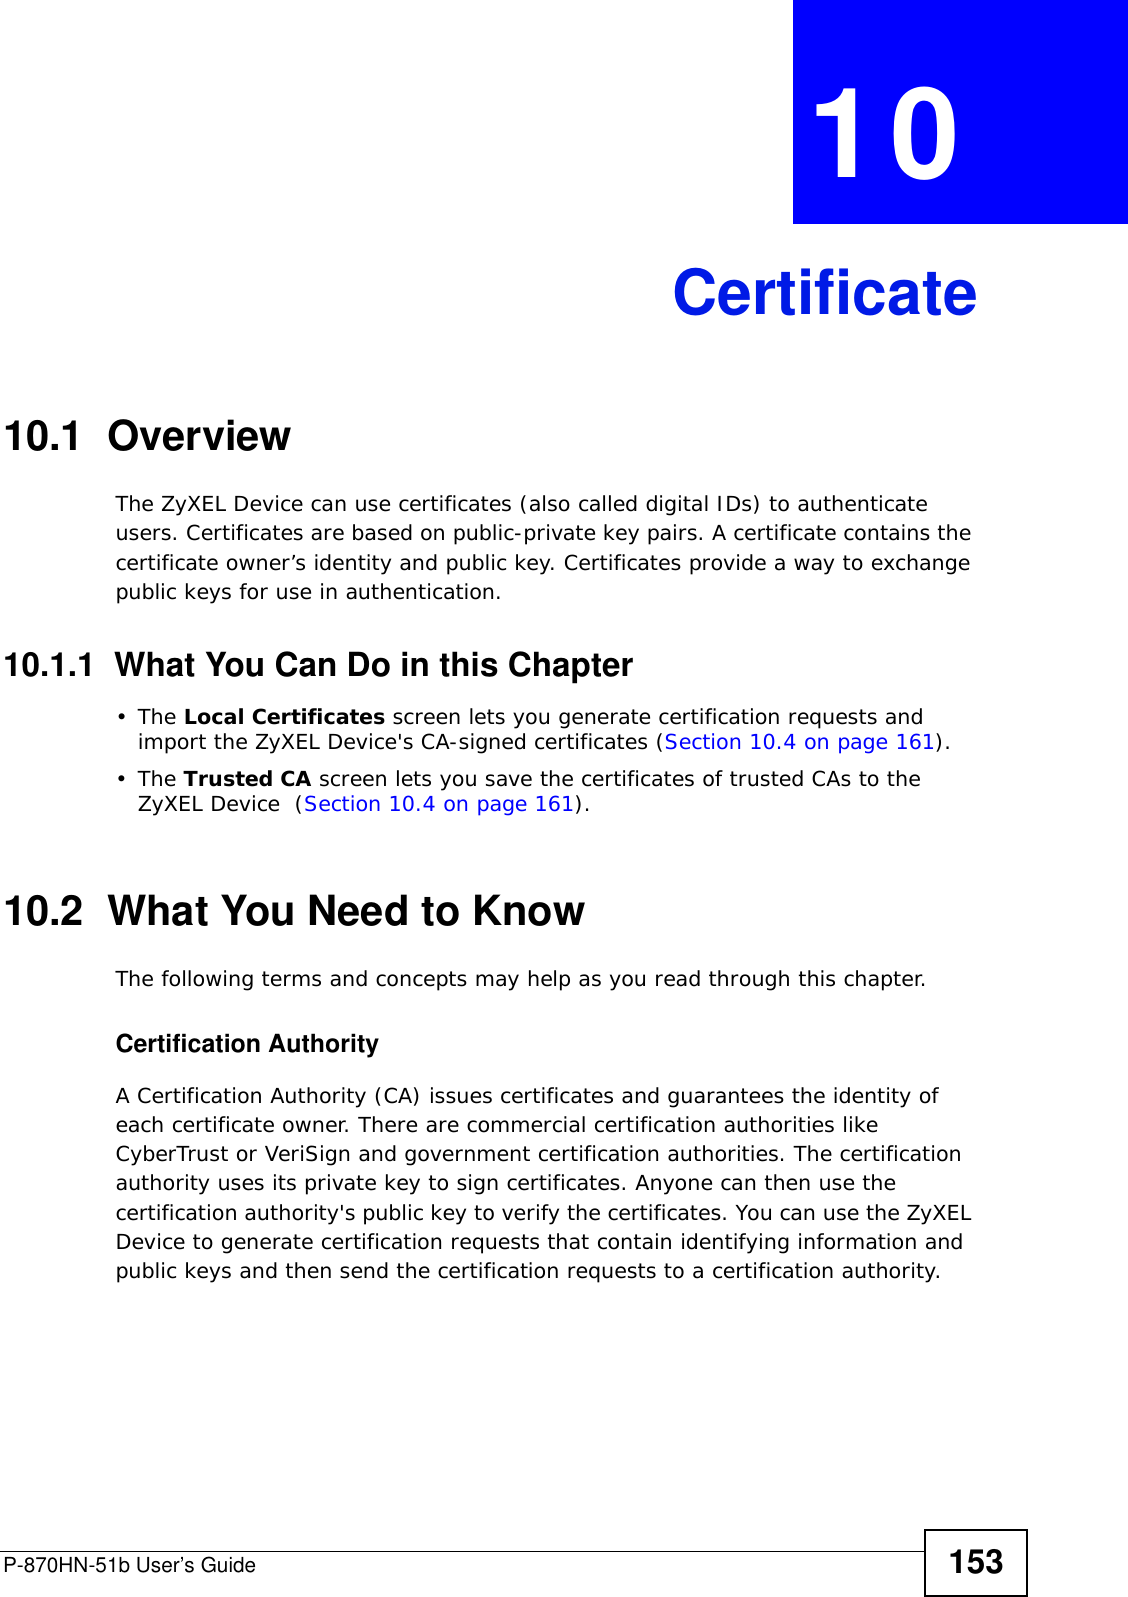 P-870HN-51b User’s Guide 153CHAPTER  10 Certificate10.1  OverviewThe ZyXEL Device can use certificates (also called digital IDs) to authenticate users. Certificates are based on public-private key pairs. A certificate contains the certificate owner’s identity and public key. Certificates provide a way to exchange public keys for use in authentication. 10.1.1  What You Can Do in this Chapter•The Local Certificates screen lets you generate certification requests and import the ZyXEL Device&apos;s CA-signed certificates (Section 10.4 on page 161).•The Trusted CA screen lets you save the certificates of trusted CAs to the ZyXEL Device  (Section 10.4 on page 161).10.2  What You Need to KnowThe following terms and concepts may help as you read through this chapter.Certification Authority A Certification Authority (CA) issues certificates and guarantees the identity of each certificate owner. There are commercial certification authorities like CyberTrust or VeriSign and government certification authorities. The certification authority uses its private key to sign certificates. Anyone can then use the certification authority&apos;s public key to verify the certificates. You can use the ZyXEL Device to generate certification requests that contain identifying information and public keys and then send the certification requests to a certification authority.